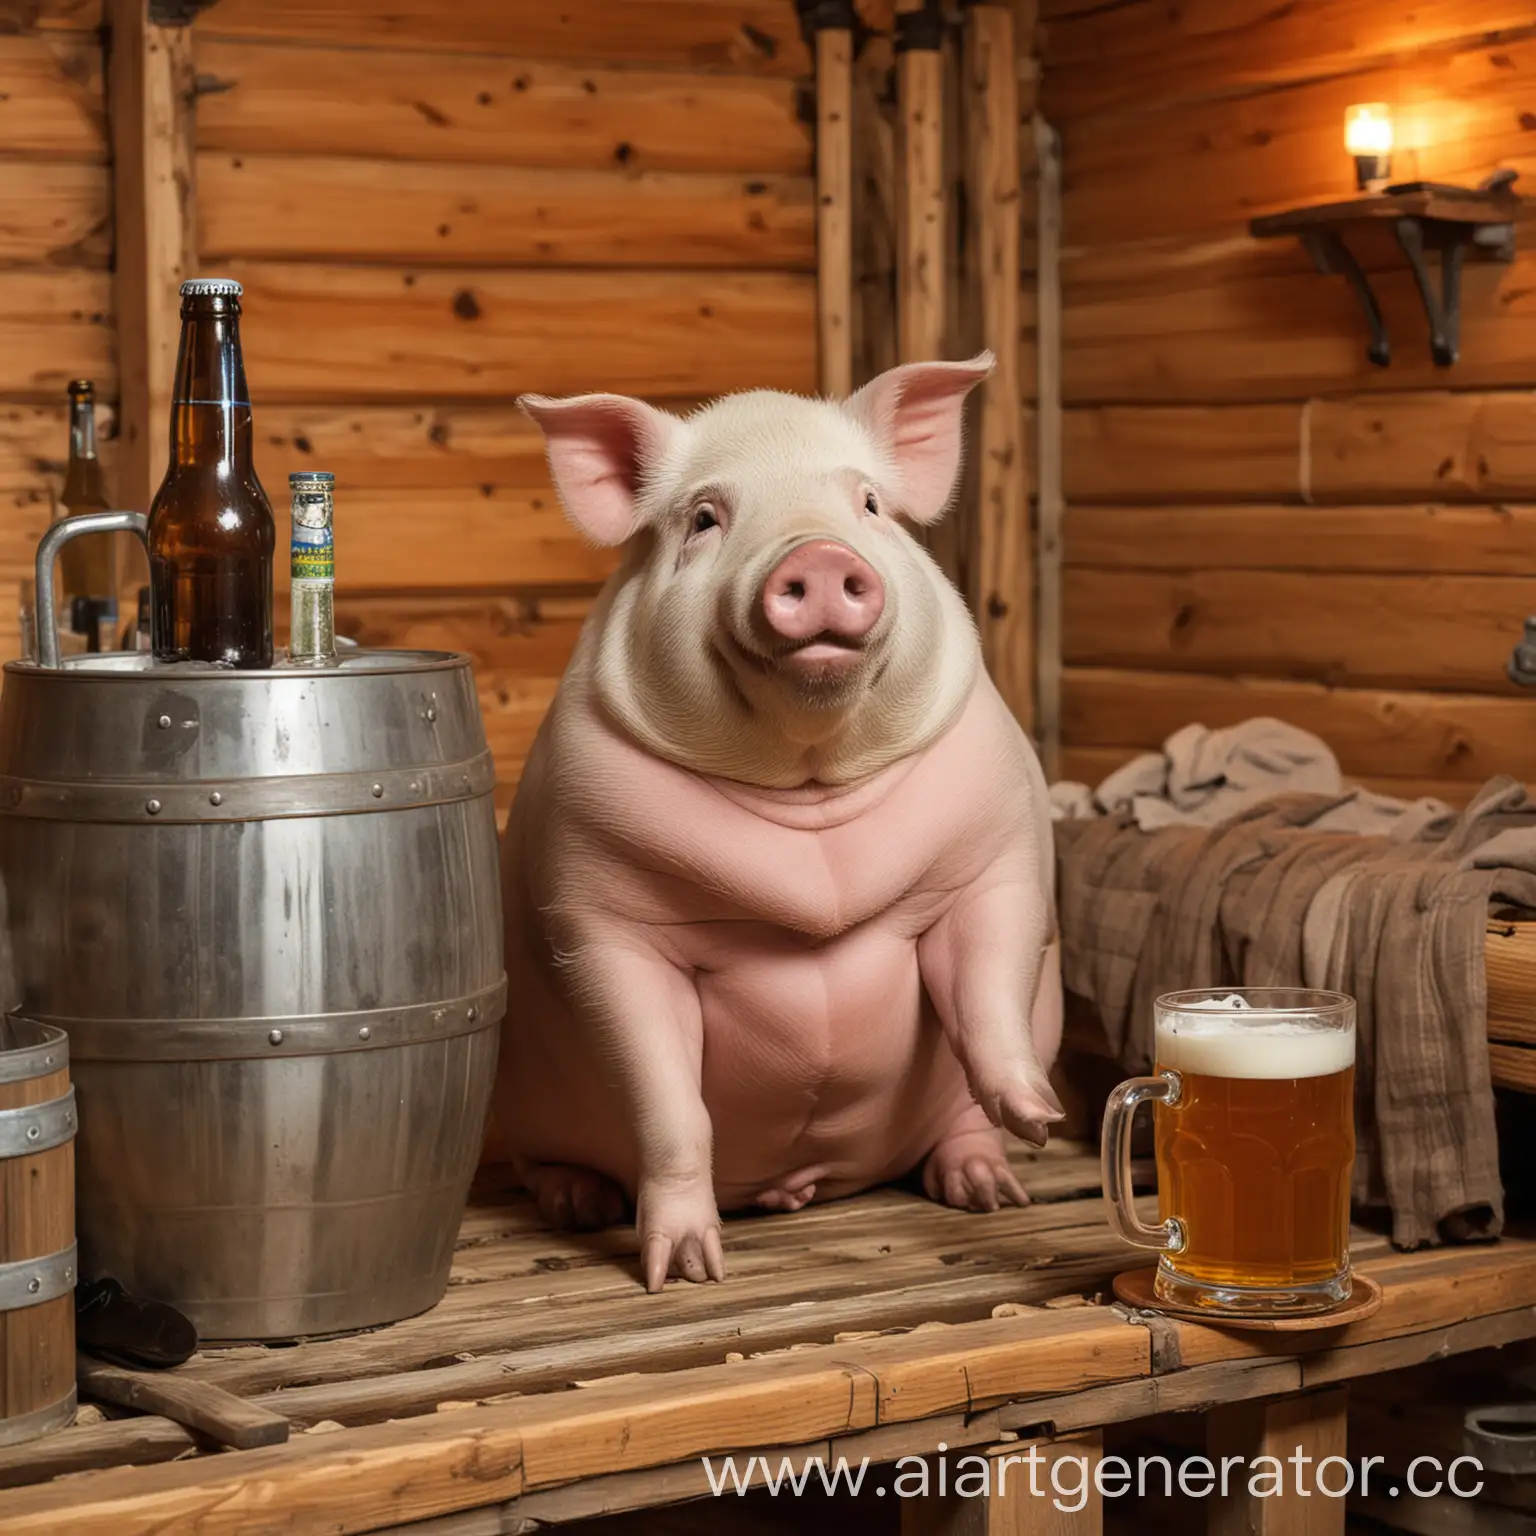 Relaxing-Sauna-Scene-with-a-Content-Pig-Enjoying-Beer